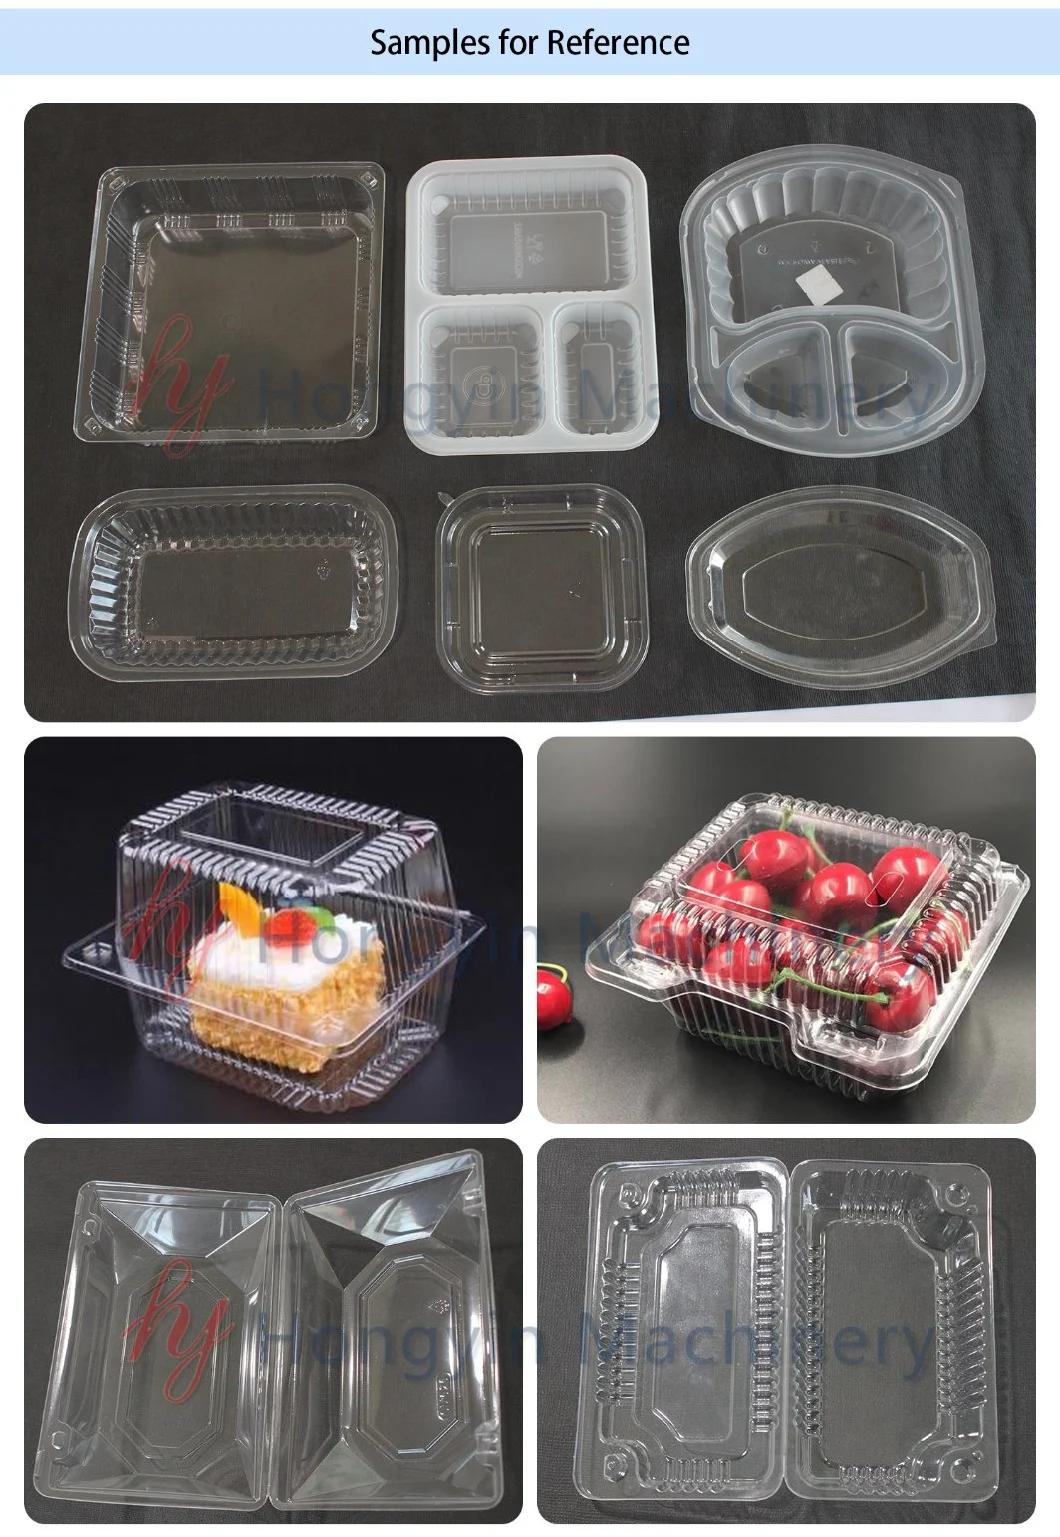 Automatic Single Station Plastic Lid Thermoforming Machine